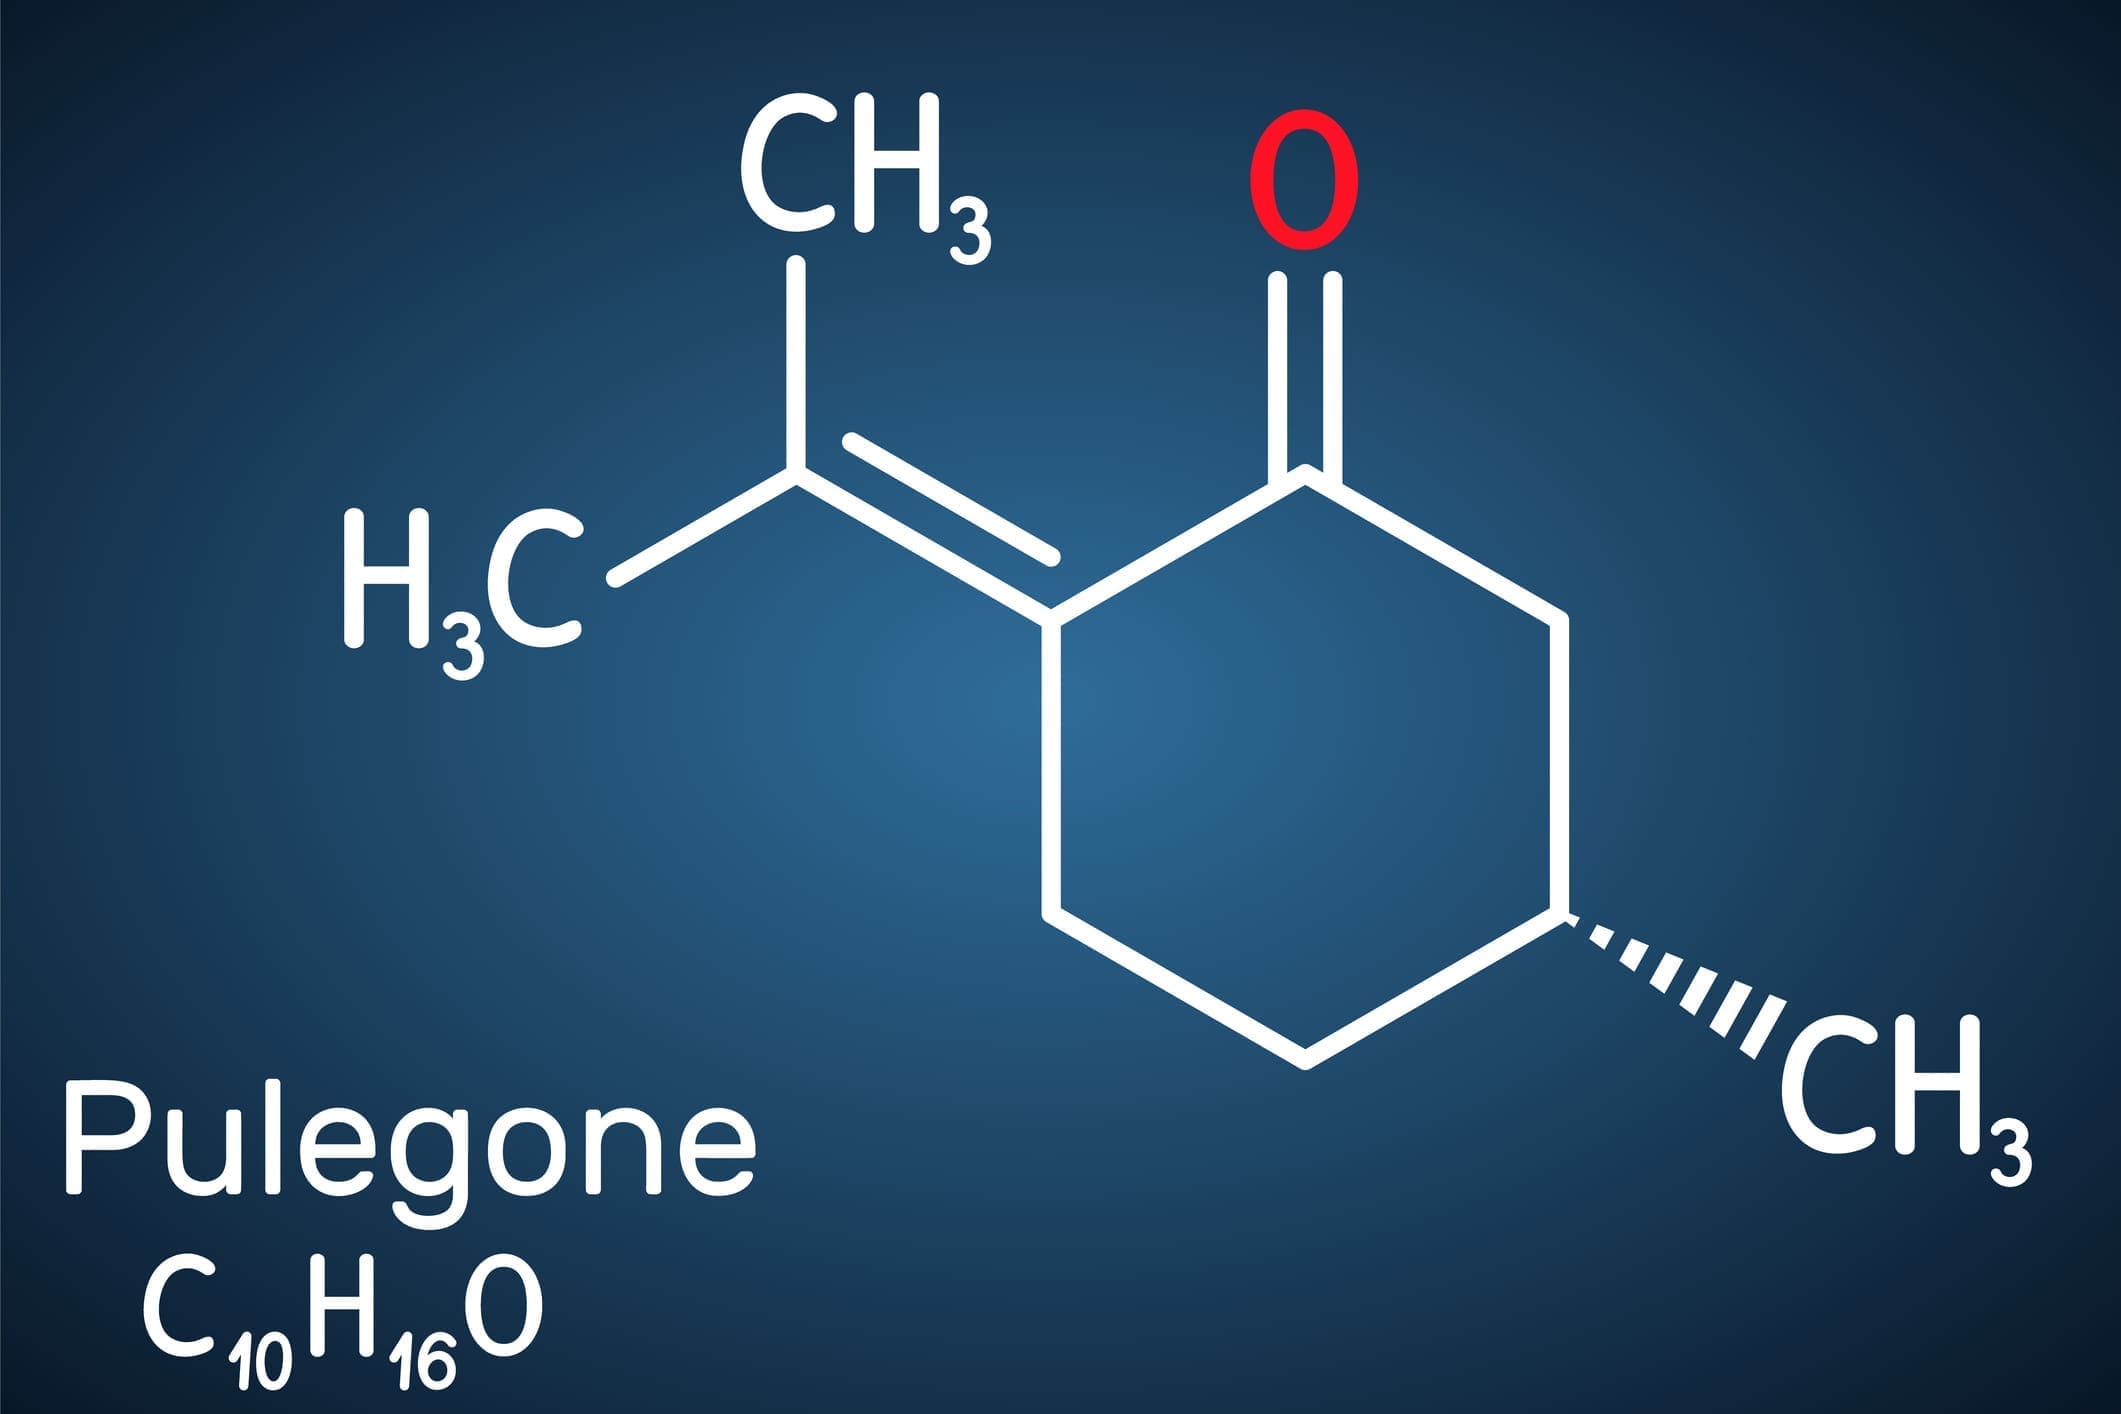 Pulegone Molecule It Is Natural Component Of Essential Oils Structural Chemical Formula And Molecule Model On The Dark Blue Background